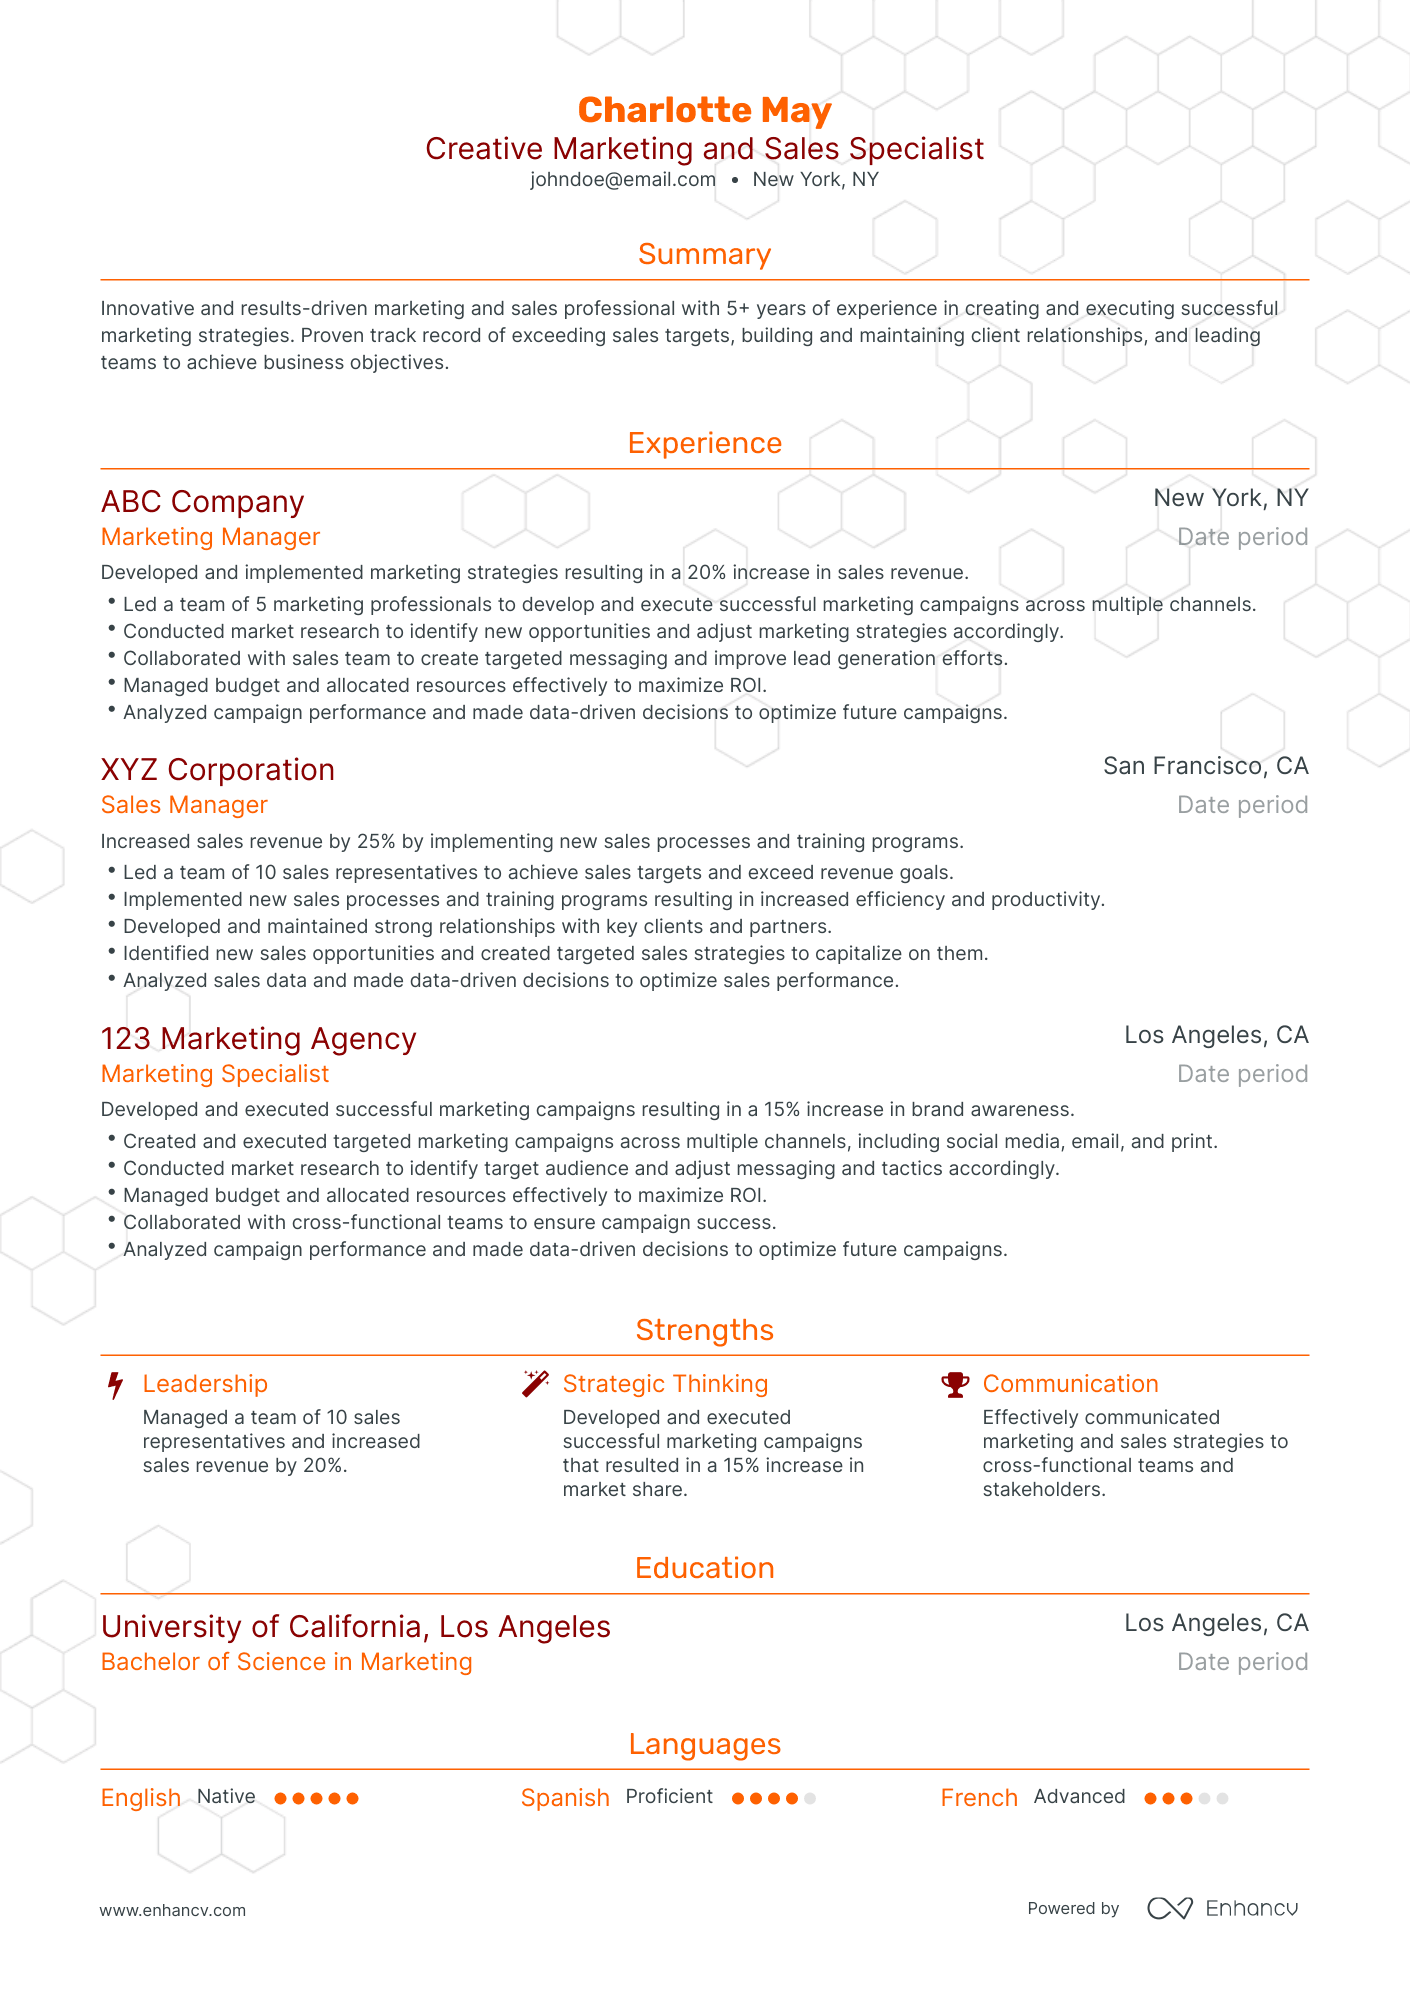 Traditional Marketing and Sales Resume Template